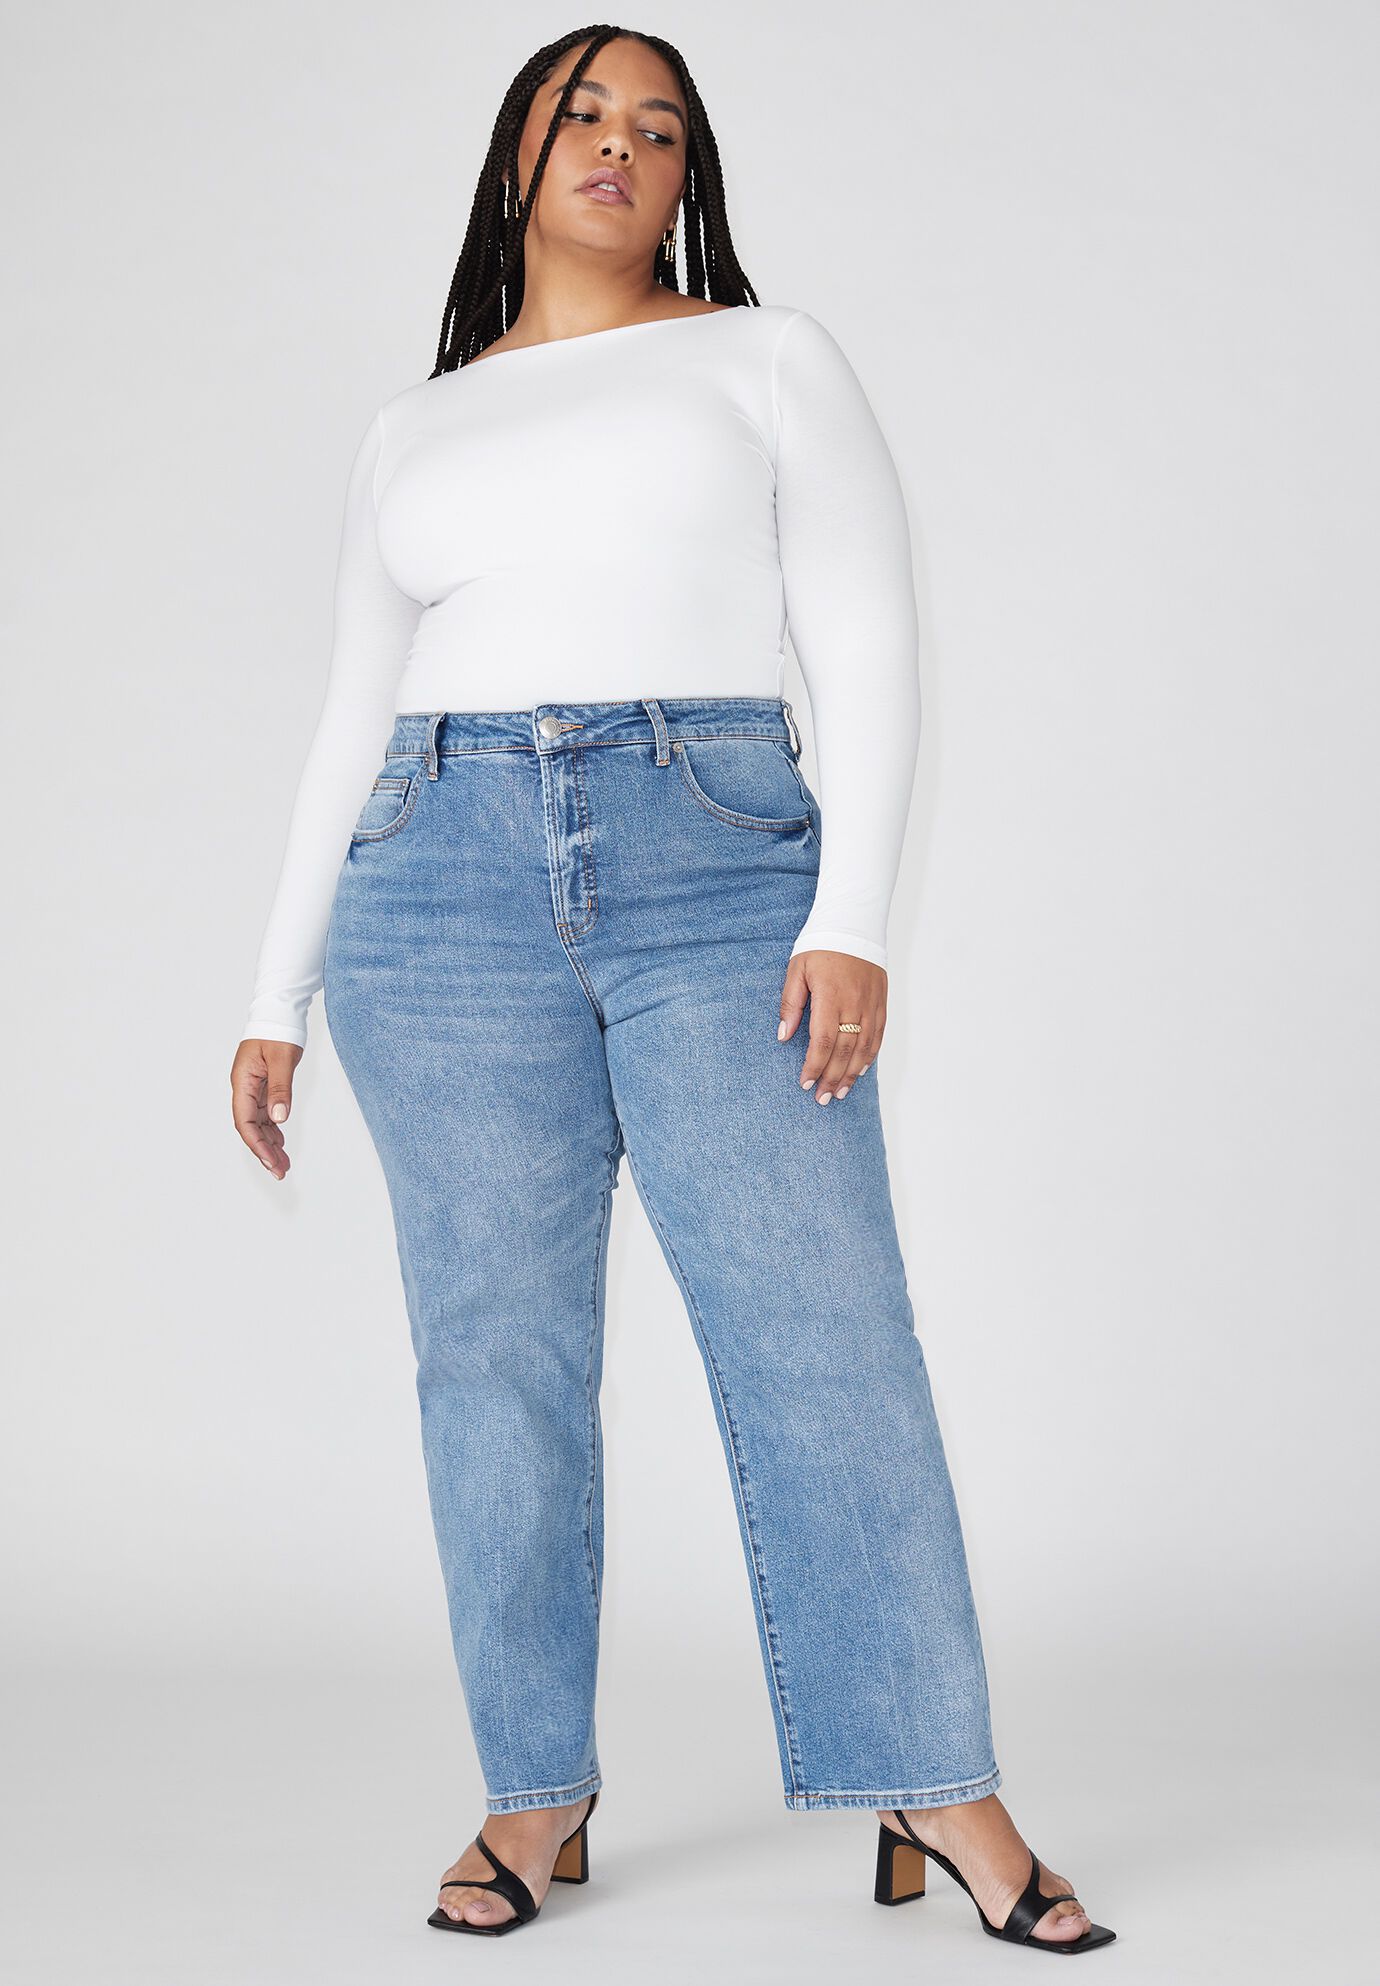 Plus Size Women The Naomi Comfort Stretch Straight Jean By ( Size 16 )